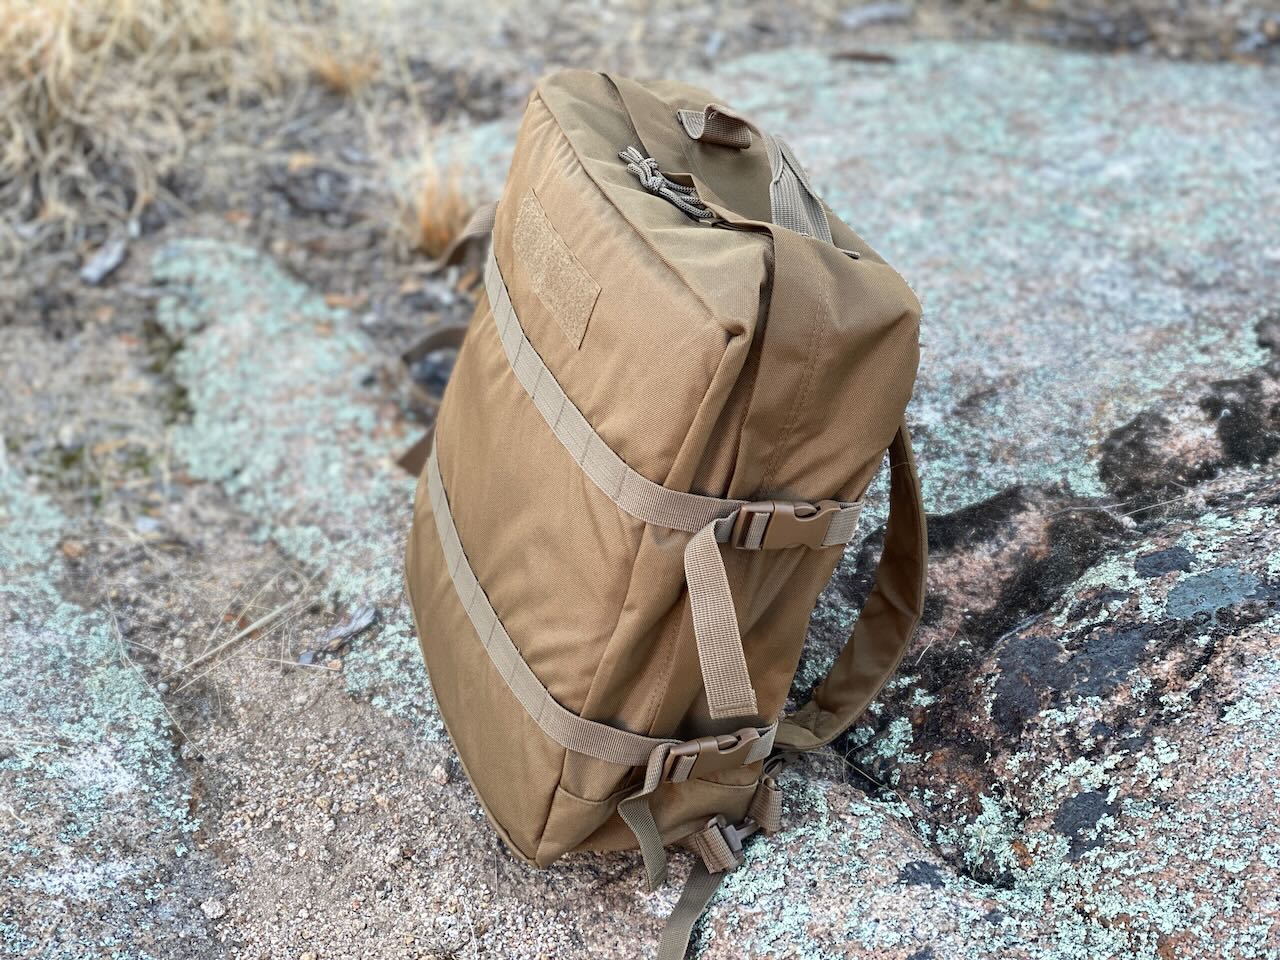 Portable Toilet Kit in a Backpack – InstaPrivy